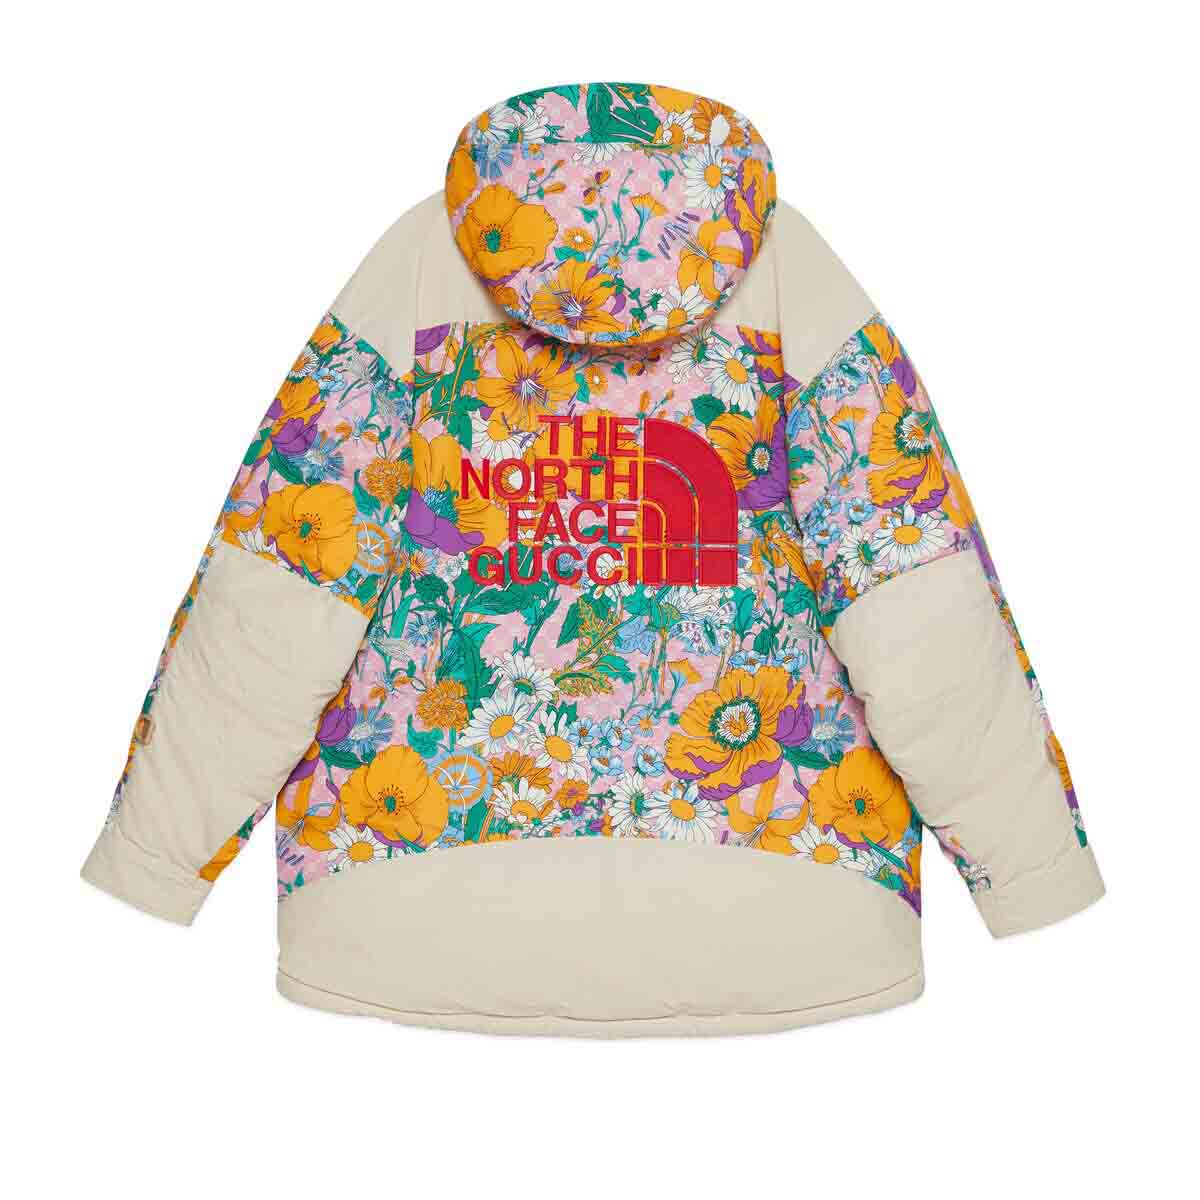 Gucci x The North Face Padded Jacket Floral Print